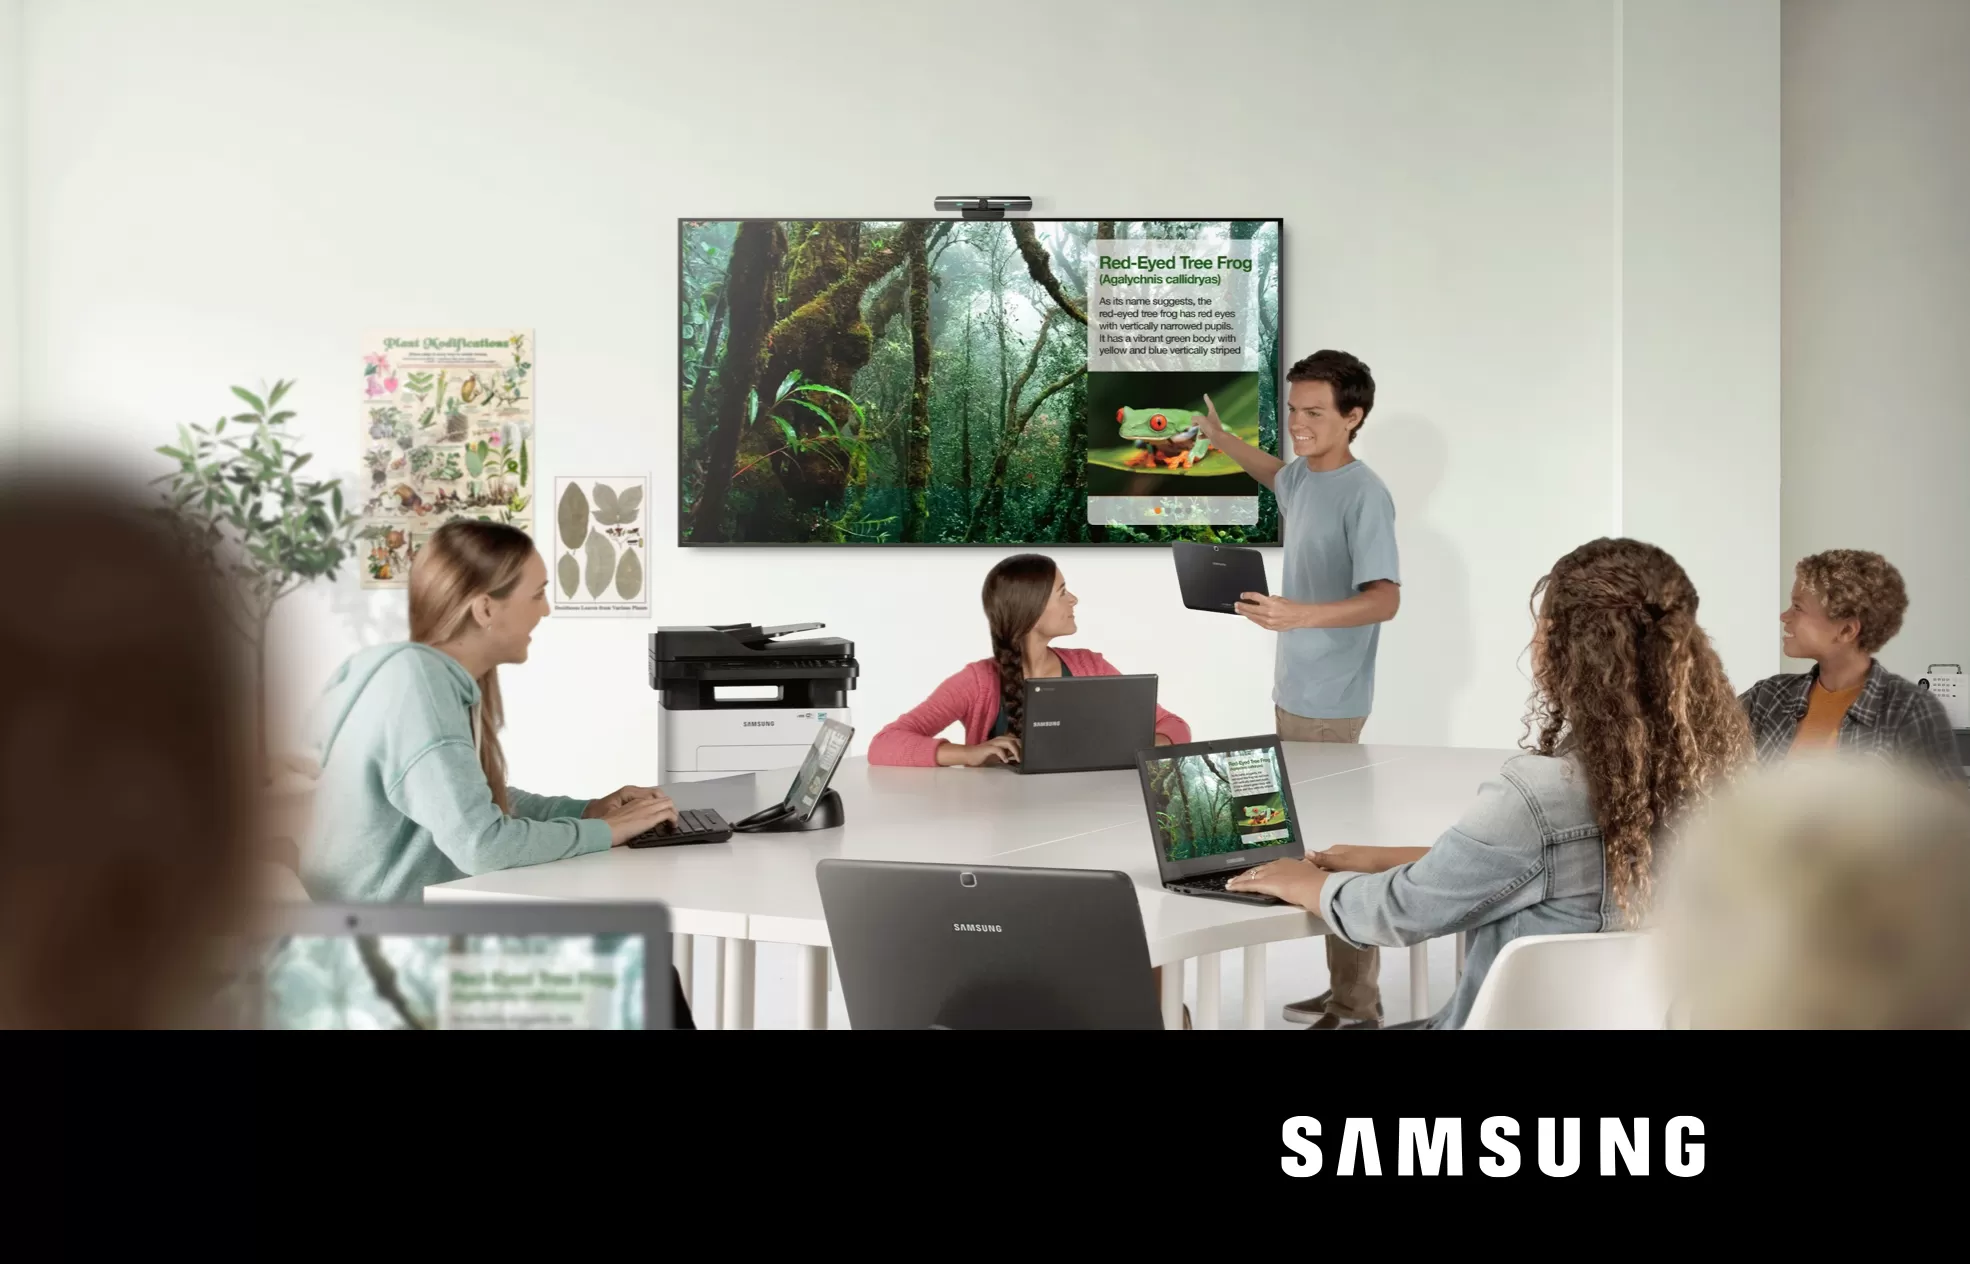 A presentation using samsung laptops and tablet to connect to the MimioPro 4 screen and the samsung logo in the bottom left